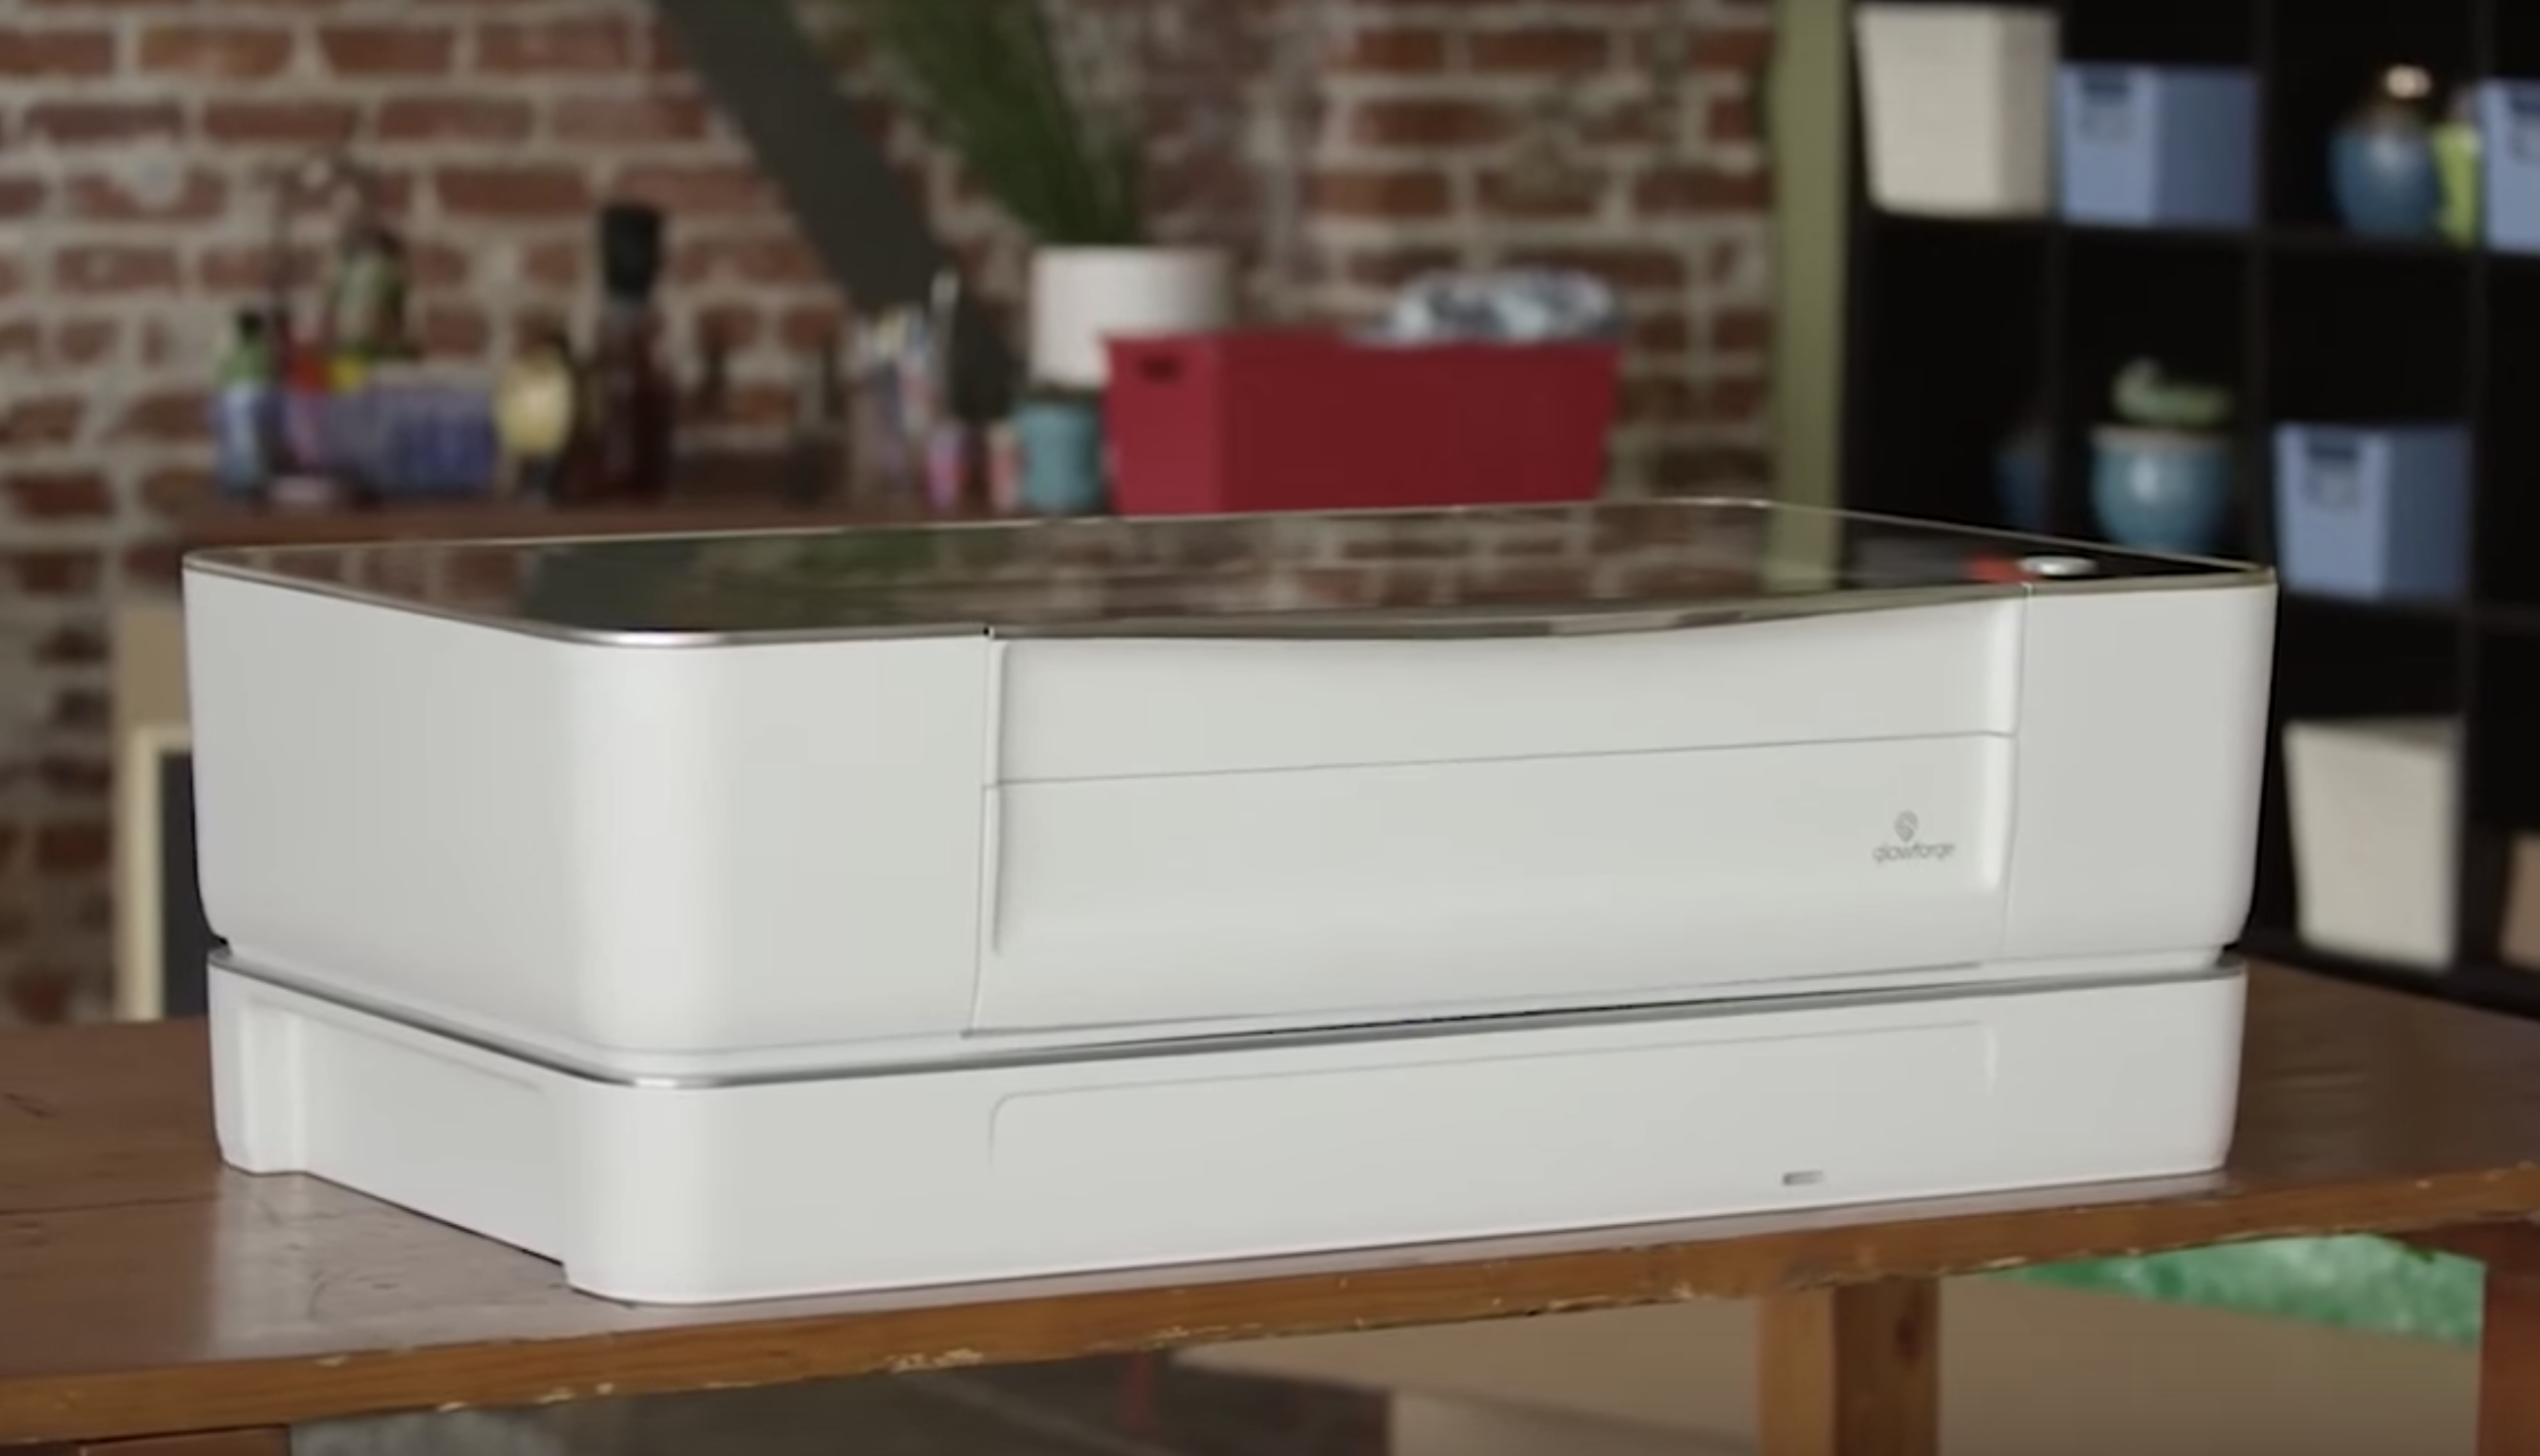 Glowforge is making materials that its laser cutters can automatically  recognize